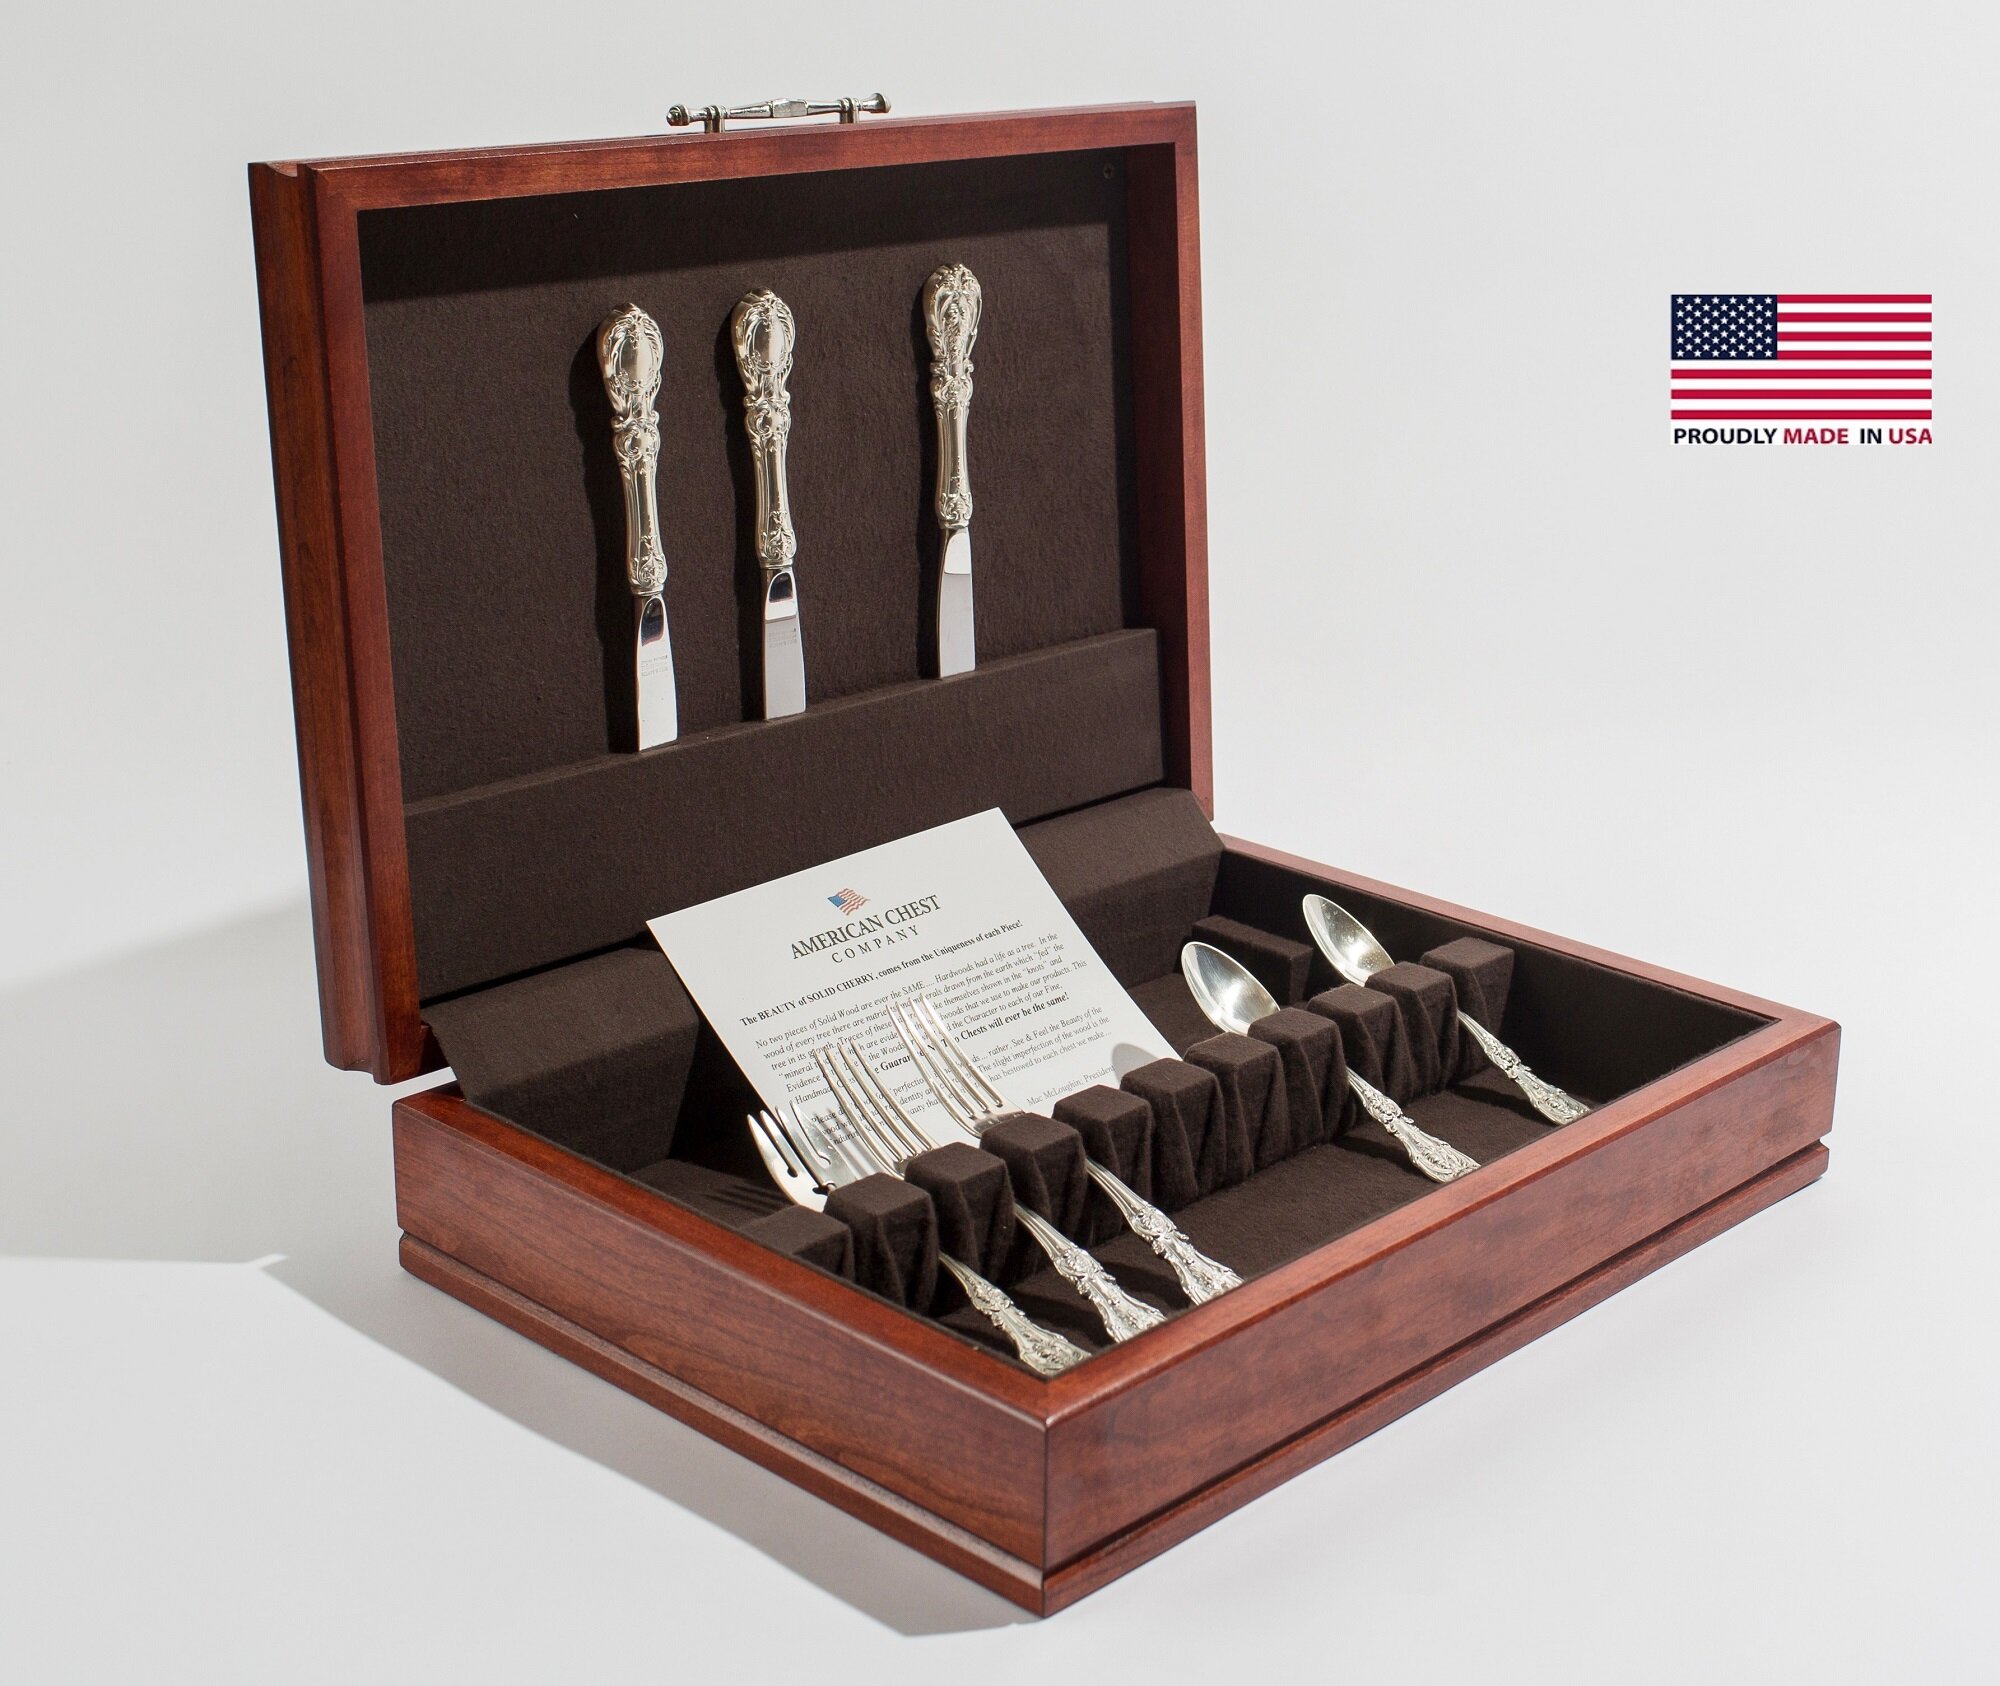 American Chest Canadian Antique Pine Divided Flatware Chest for Stainless Flatware, Brown